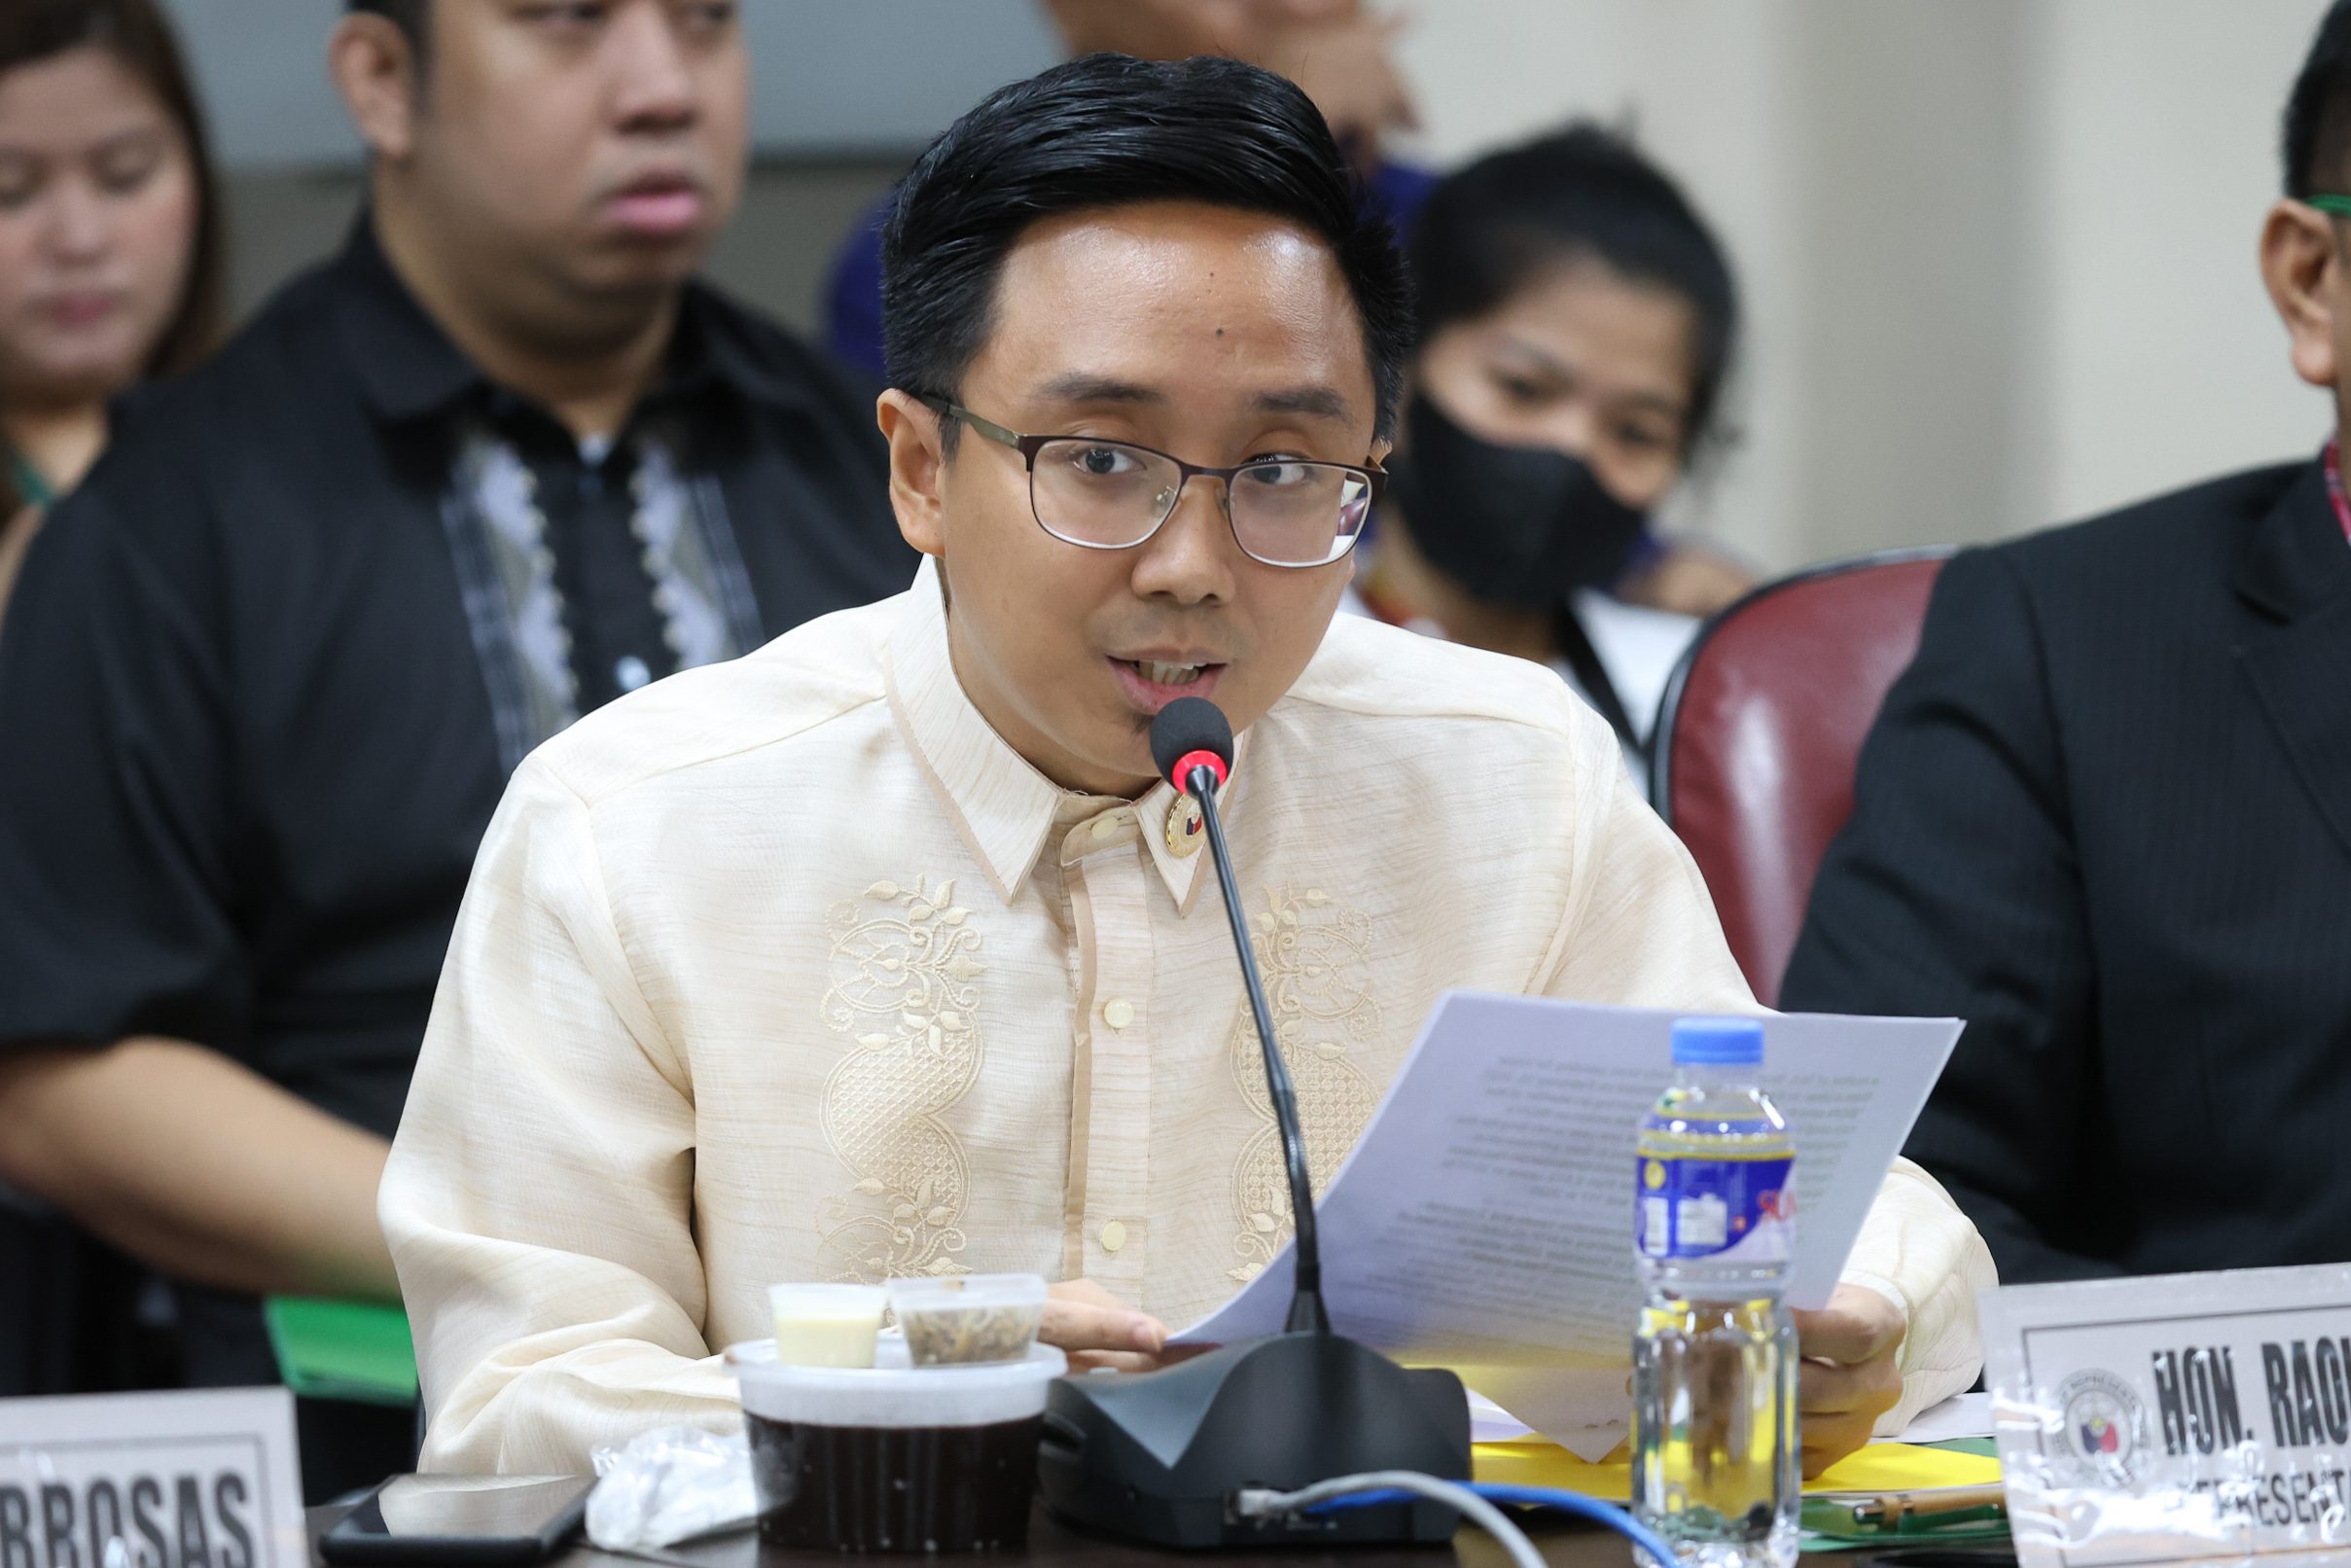 Makabayan lawmakers, activists rally behind red-tagged youth lawmaker